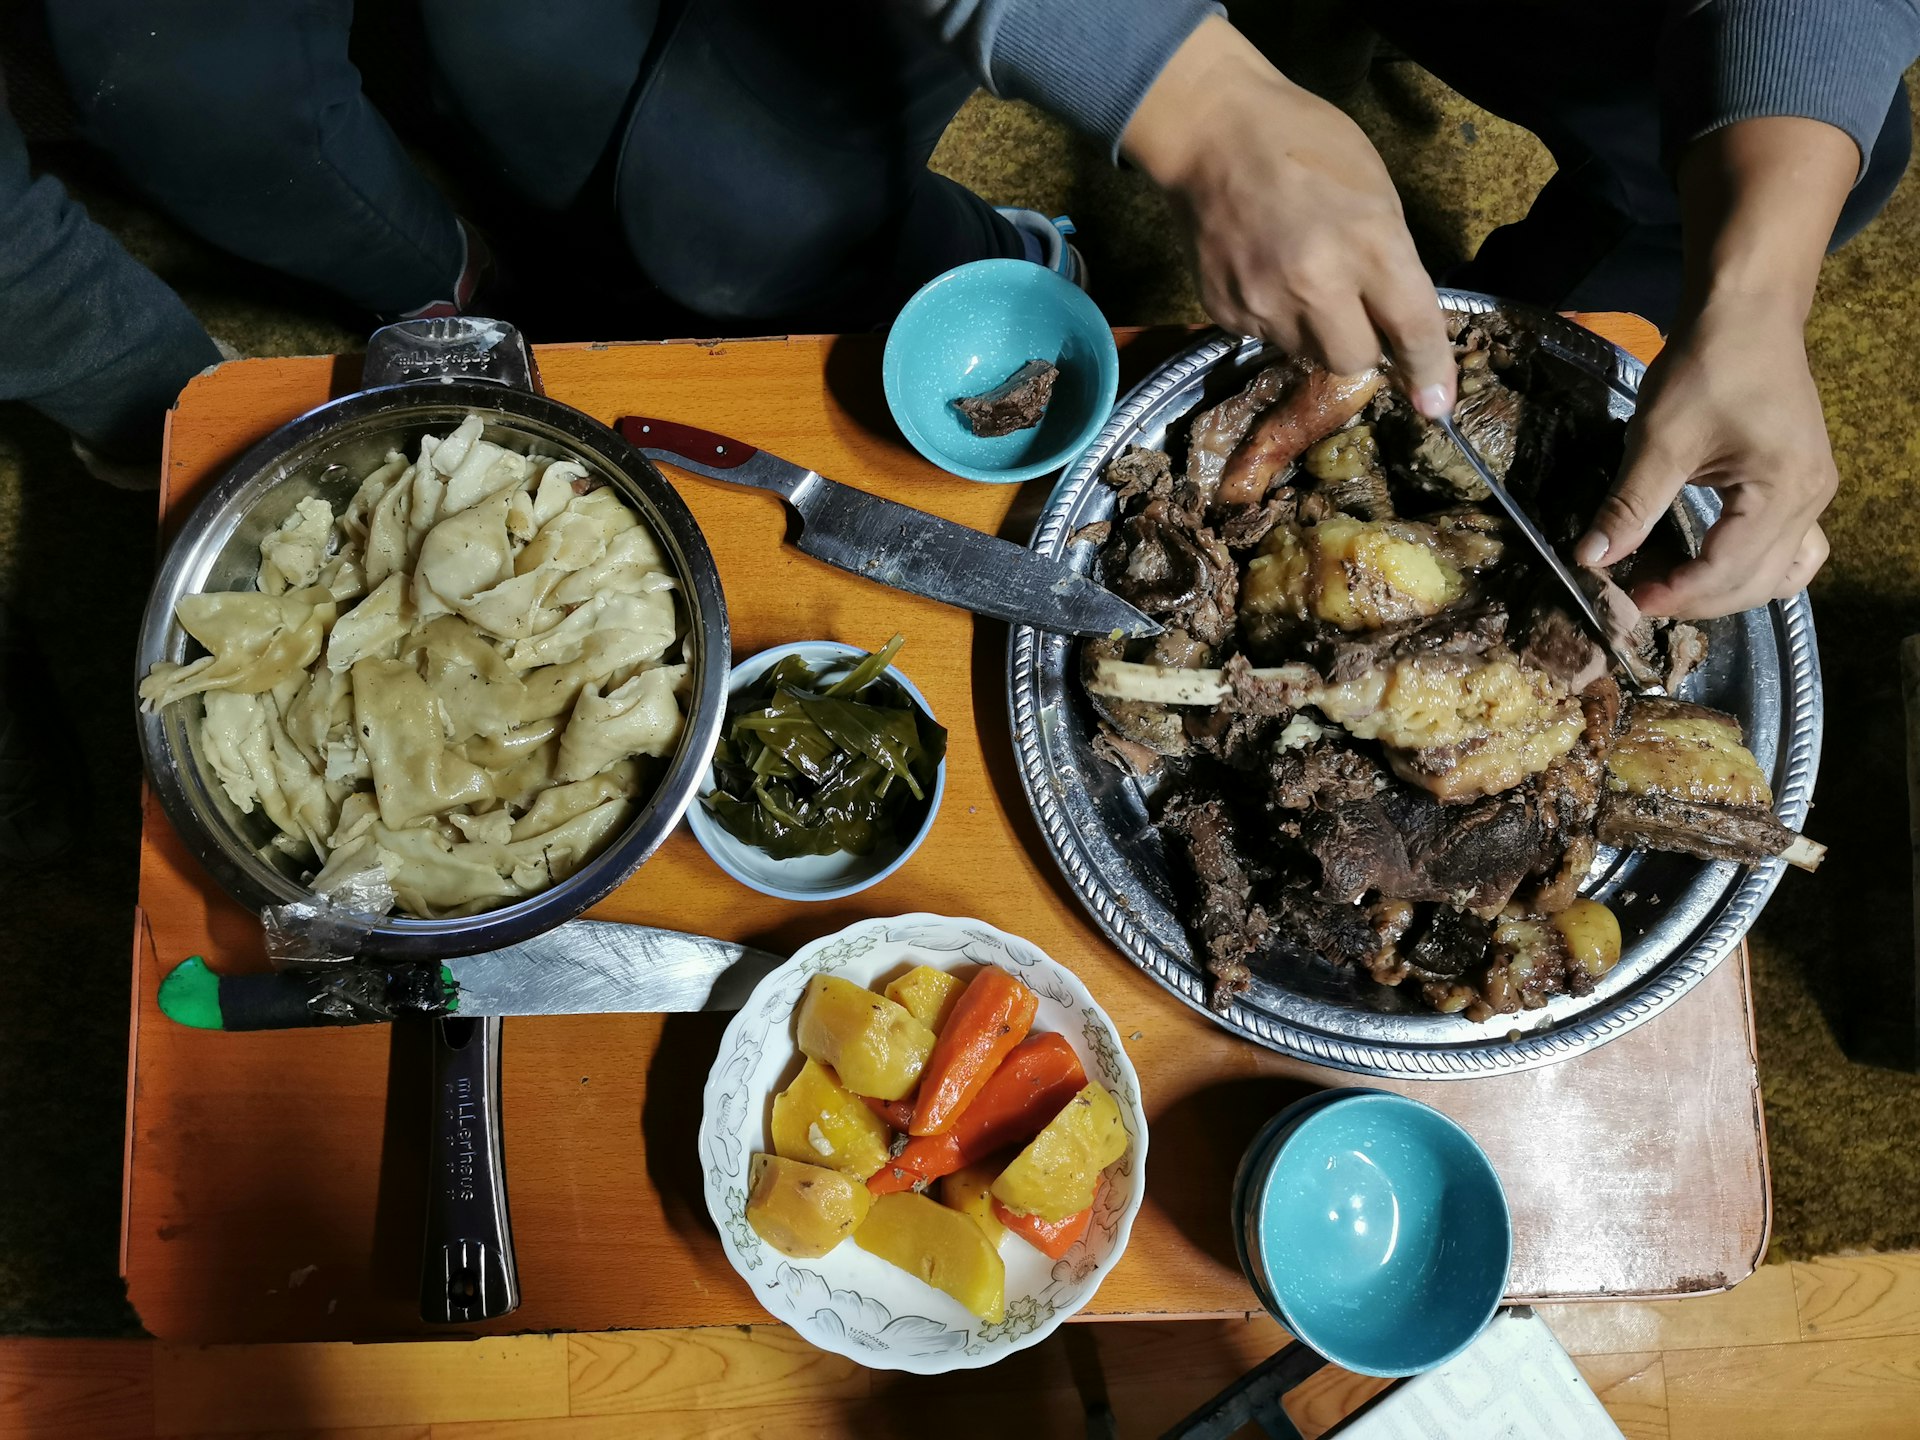 Four bowls of food on a small wooden table, including a bowl of greens and fried horse meat